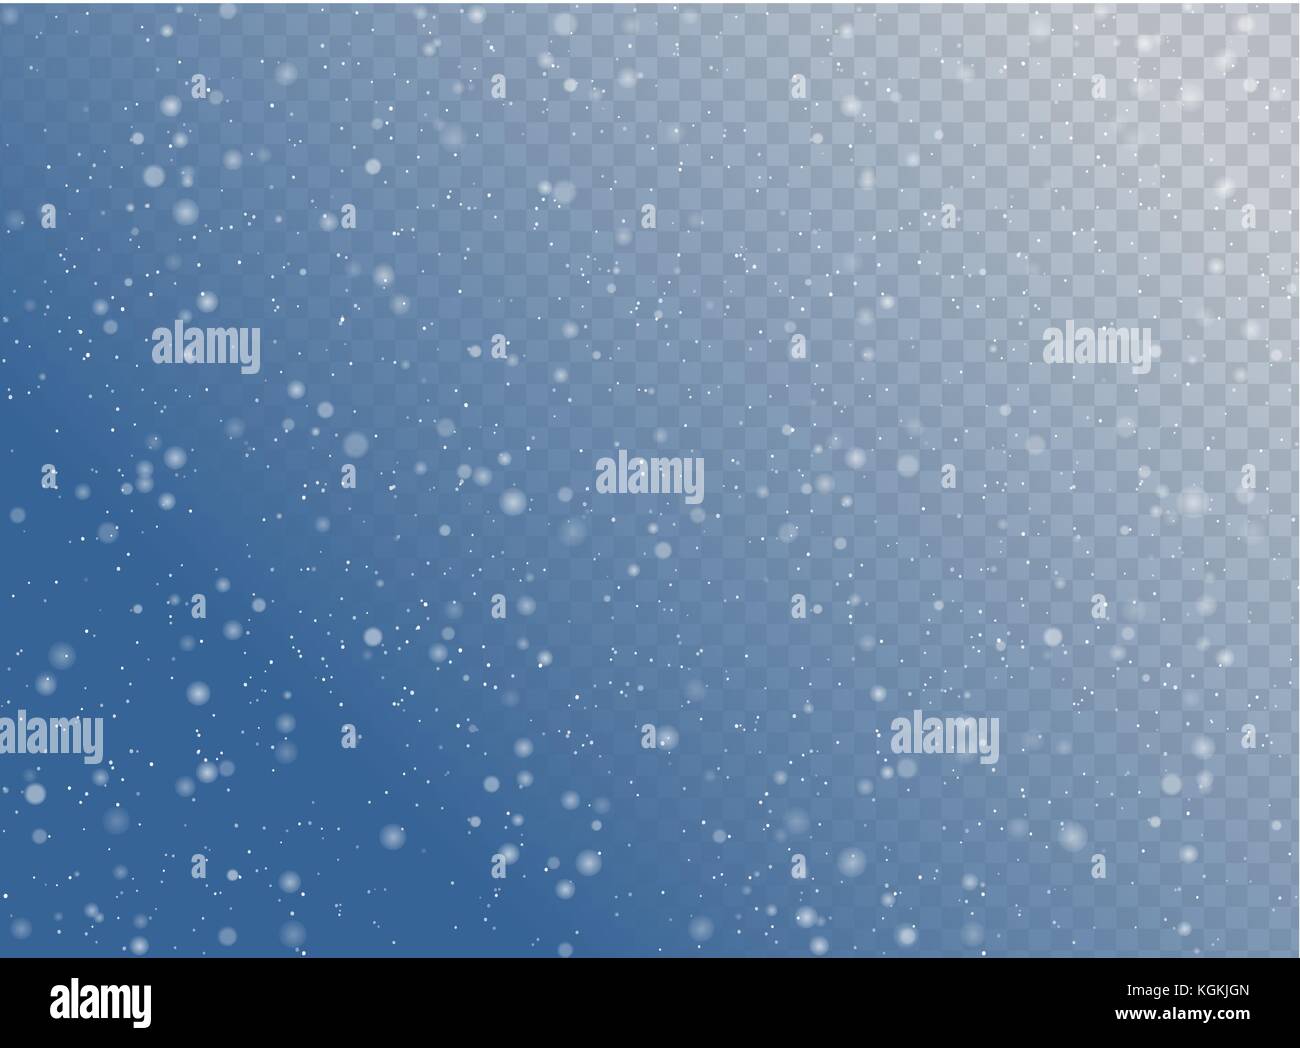 Seamless vector white snowfall effect on blue transparent horizontal background. Overlay snow flake Christmas or New Year winter effect. Stock Vector